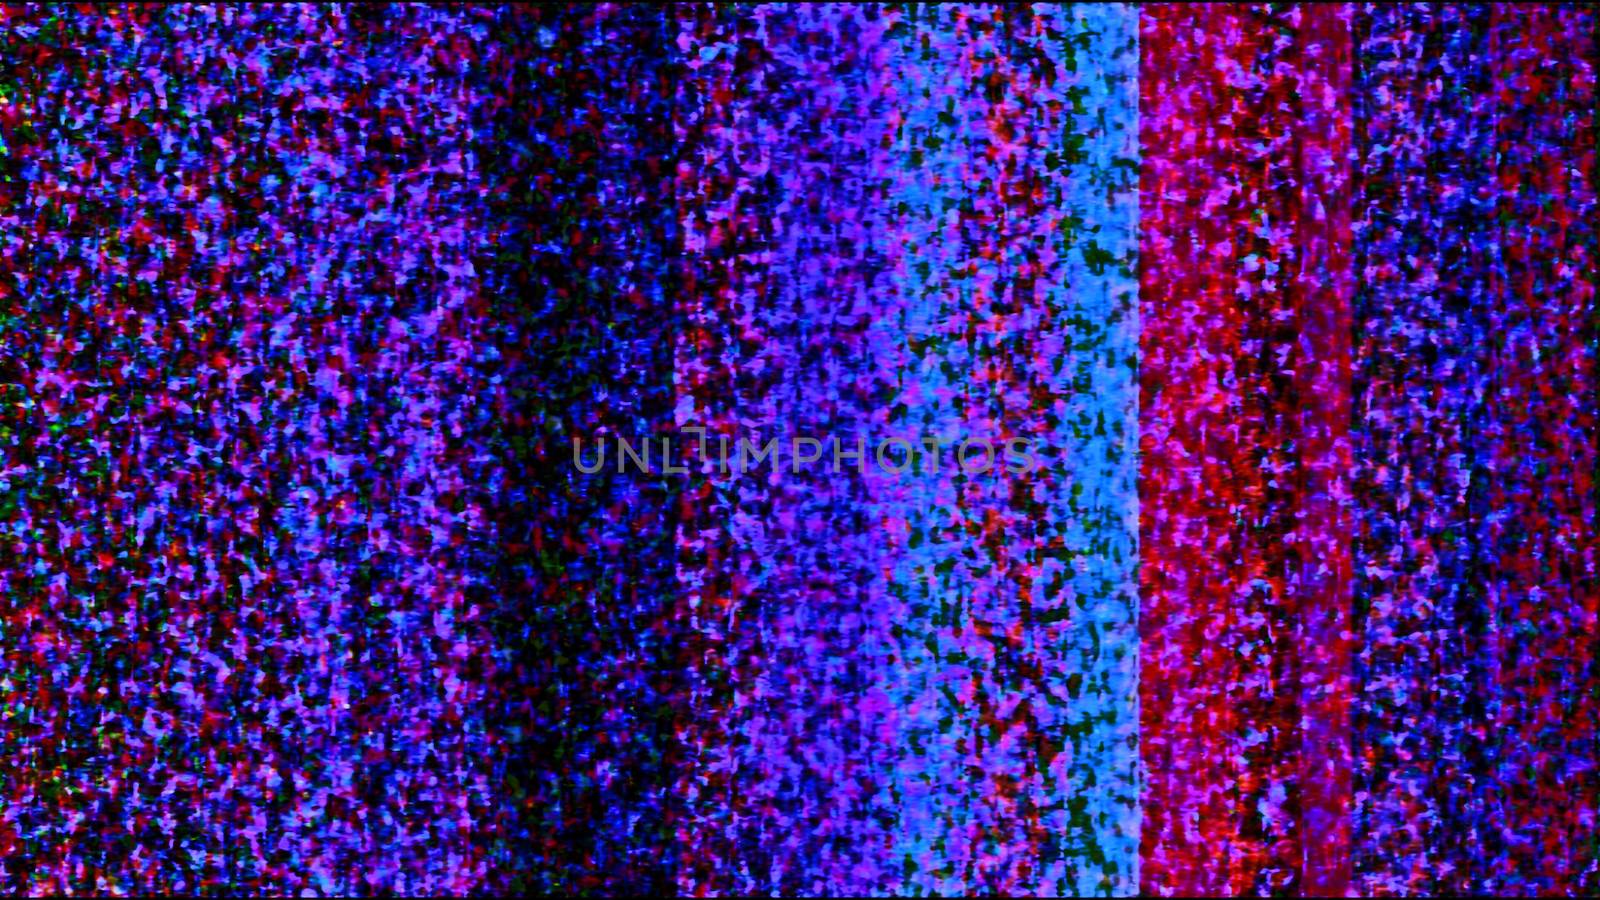 Future Tech 0287 - Futuristic technology abstract screen with colorful digital noise.